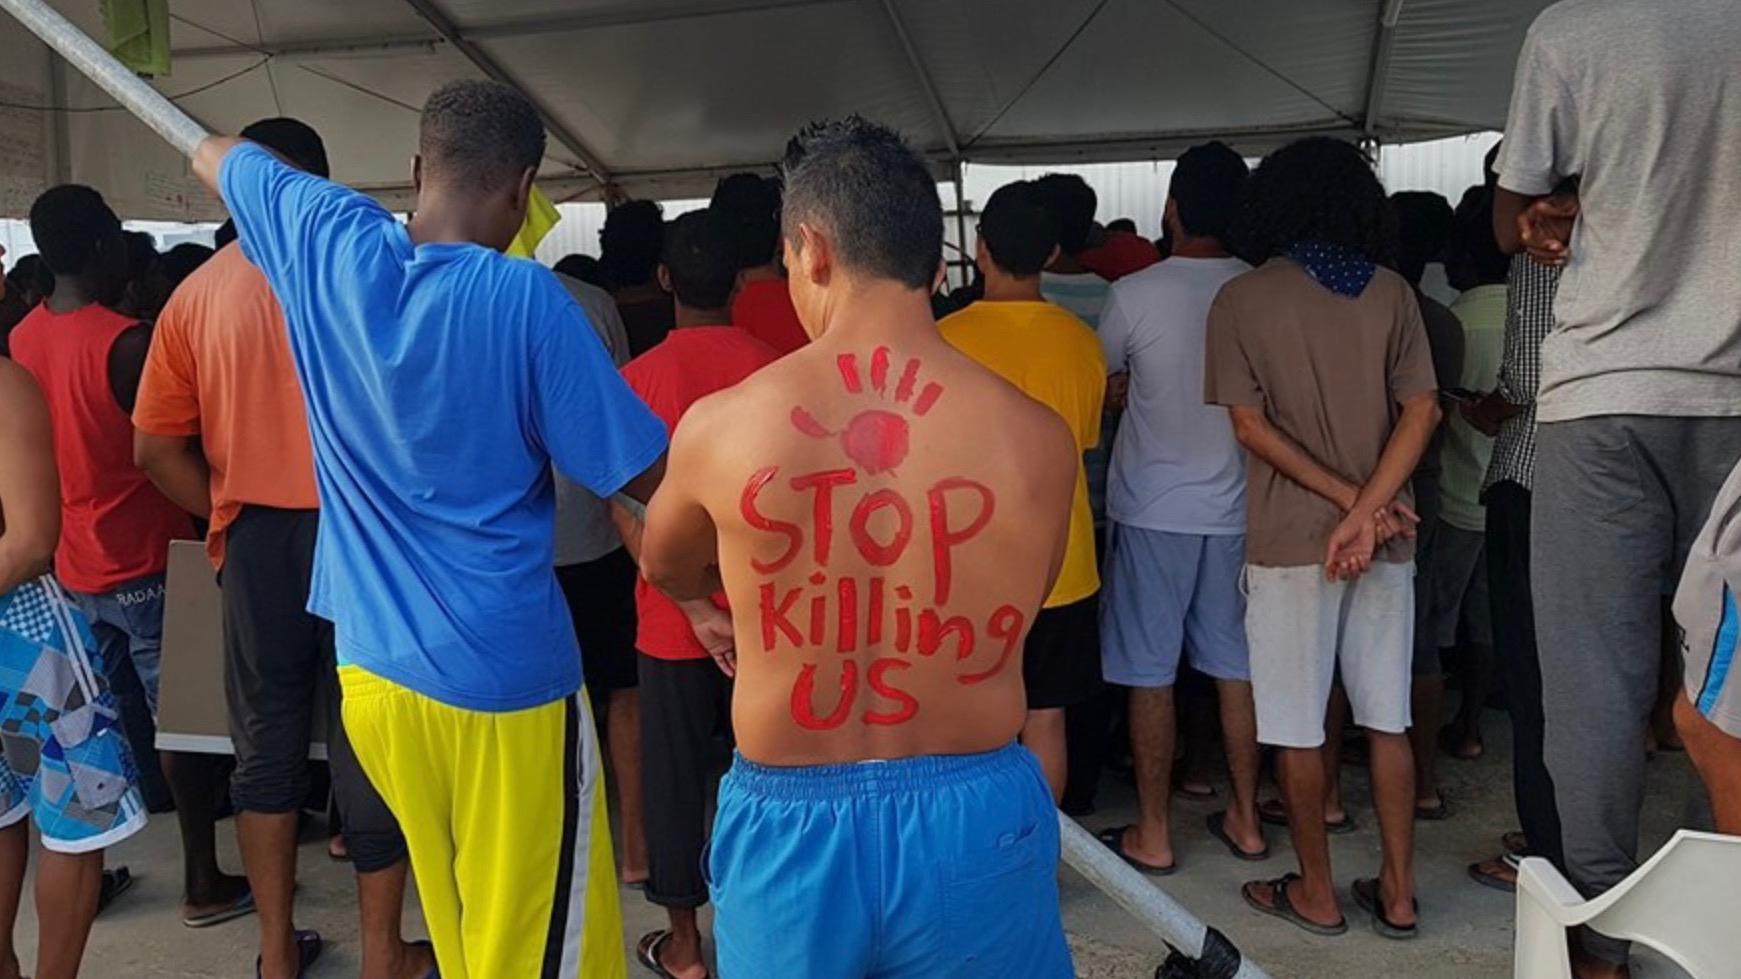 Refugees and asylum seekers on Manus Island, PNG are broadcasting their message to the world via soc